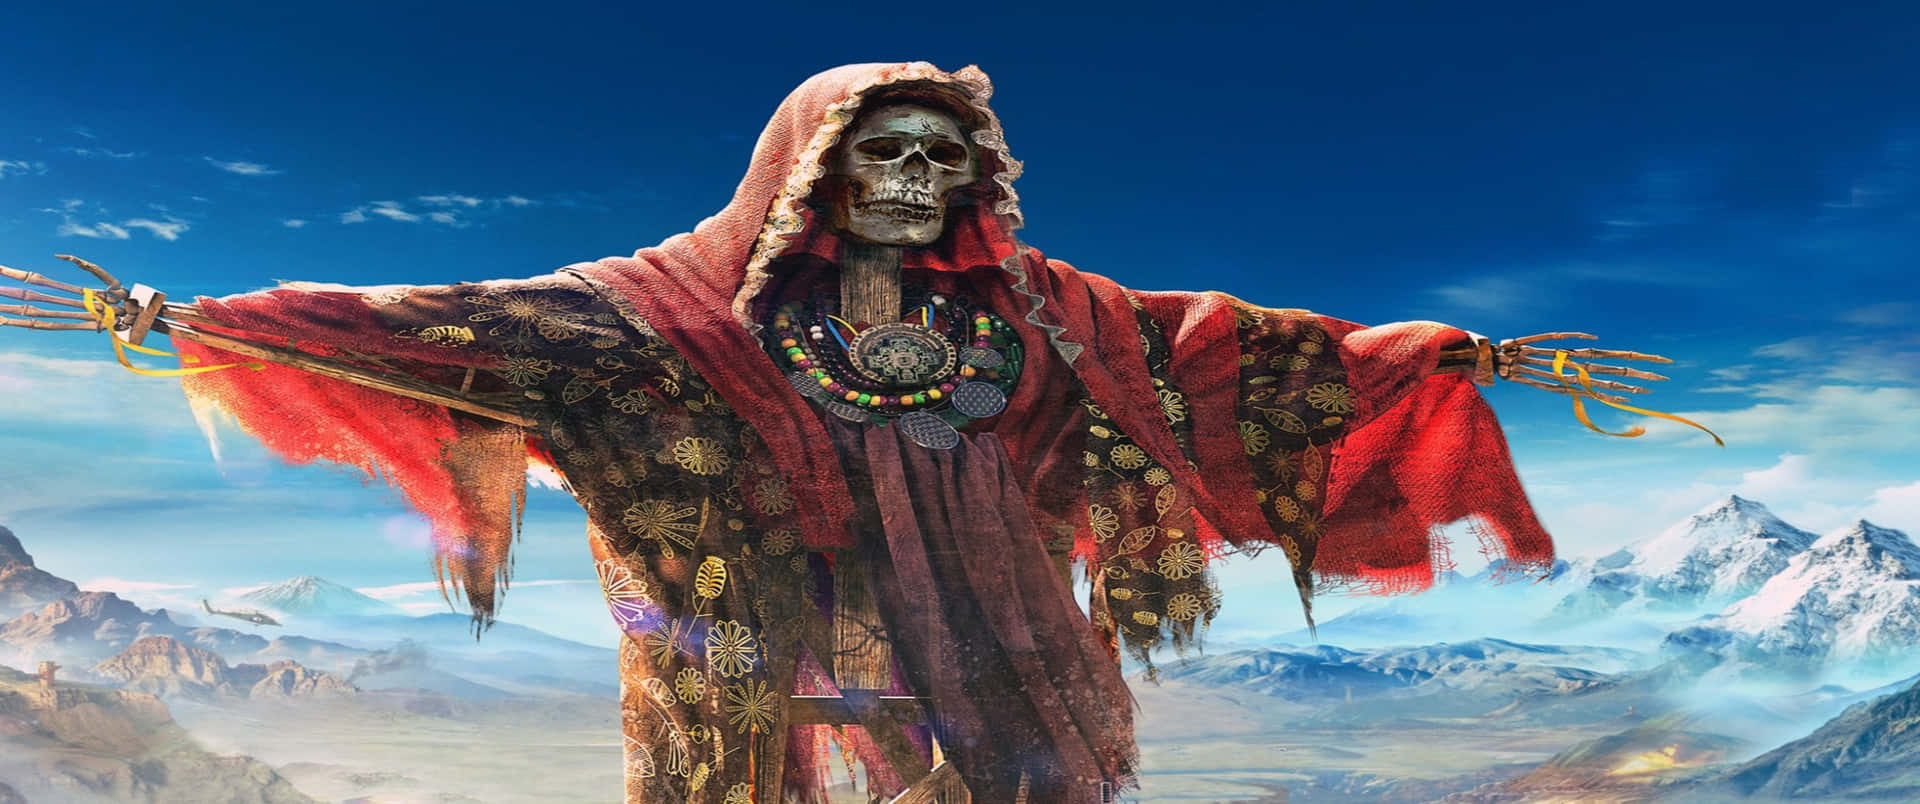 A Skeleton With A Red Cloak Standing In The Mountains